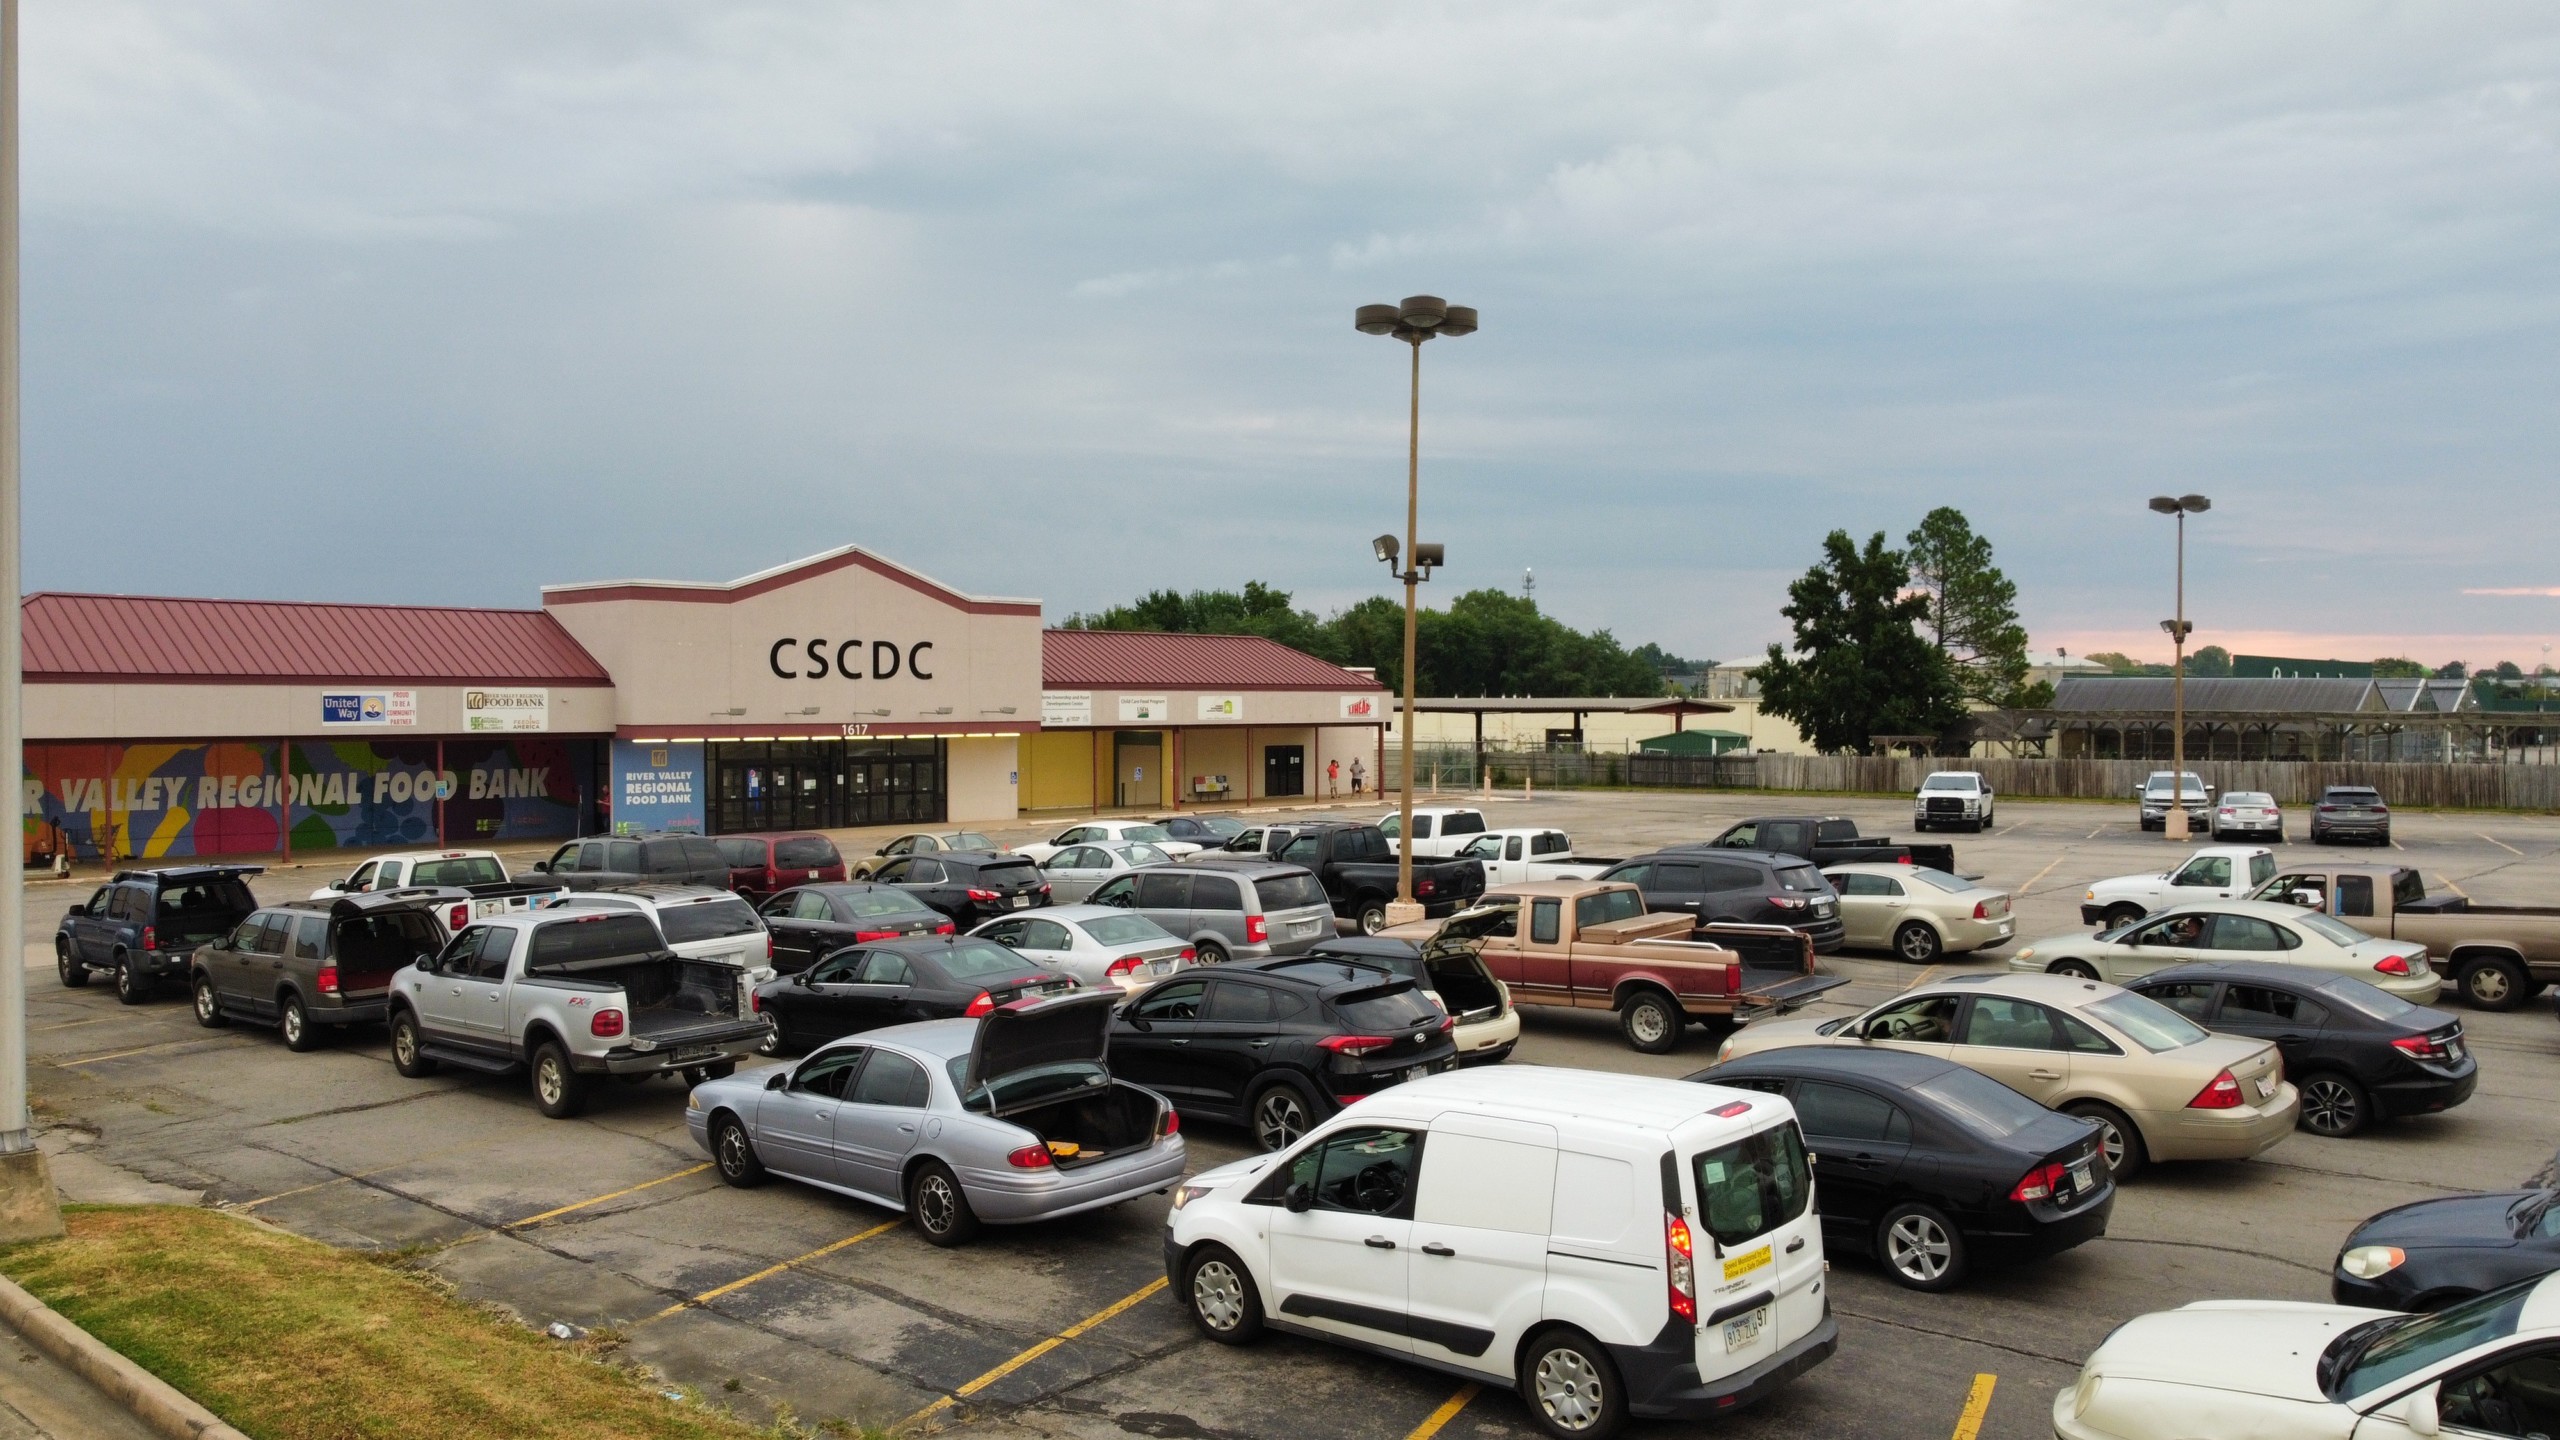 Rows of vehicles wait in line to receive food on an overcast day.